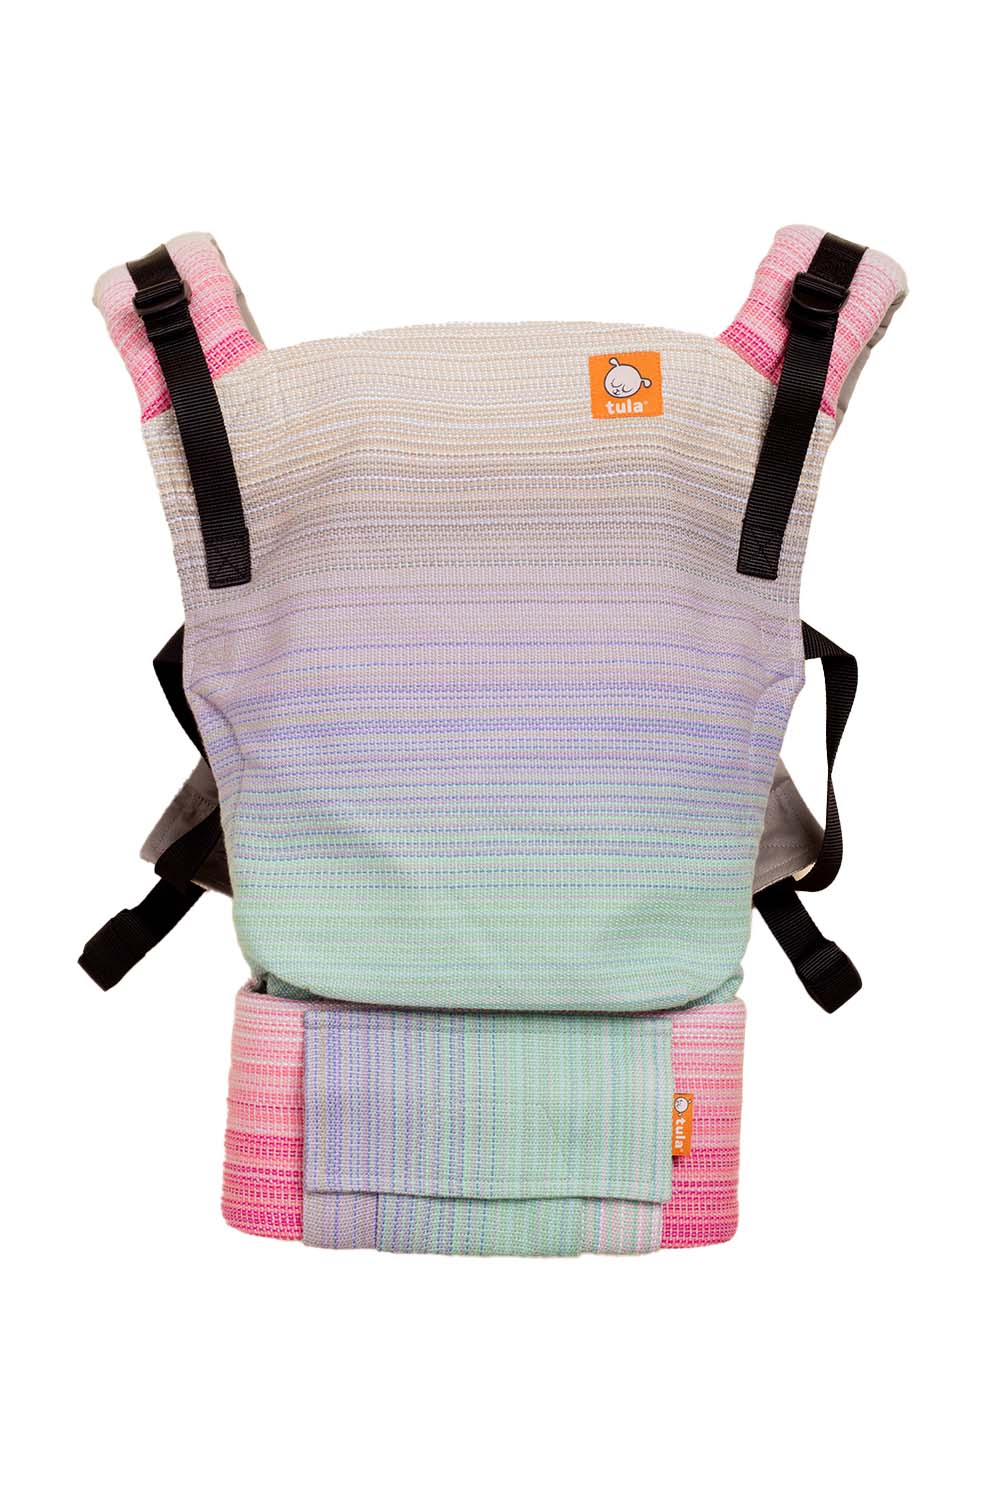 Lullabies - Signature Handwoven Free-to-Grow Baby Carrier